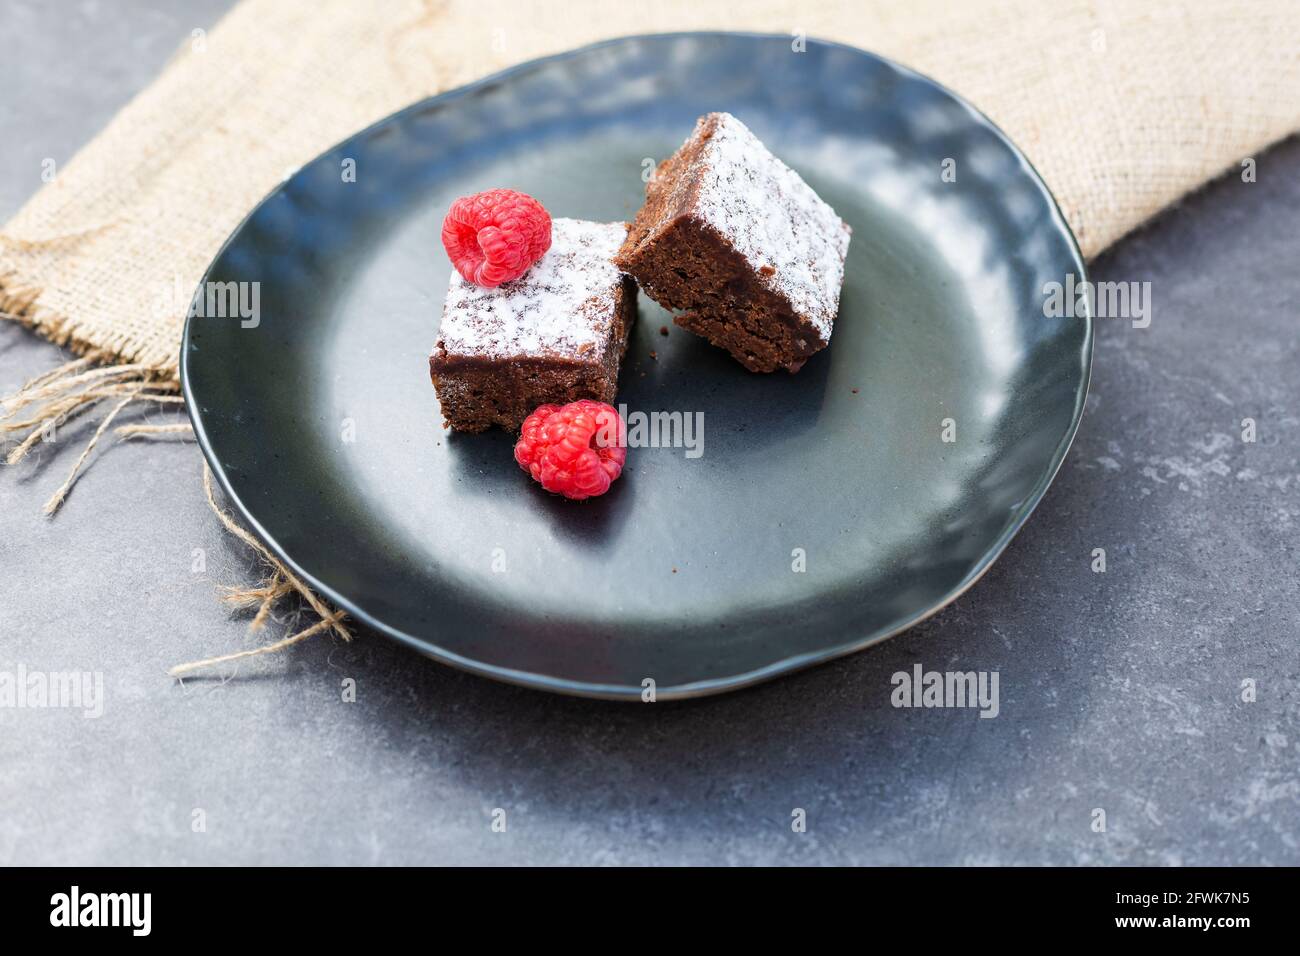 Two brownie slices on plate with raspberries Stock Photo